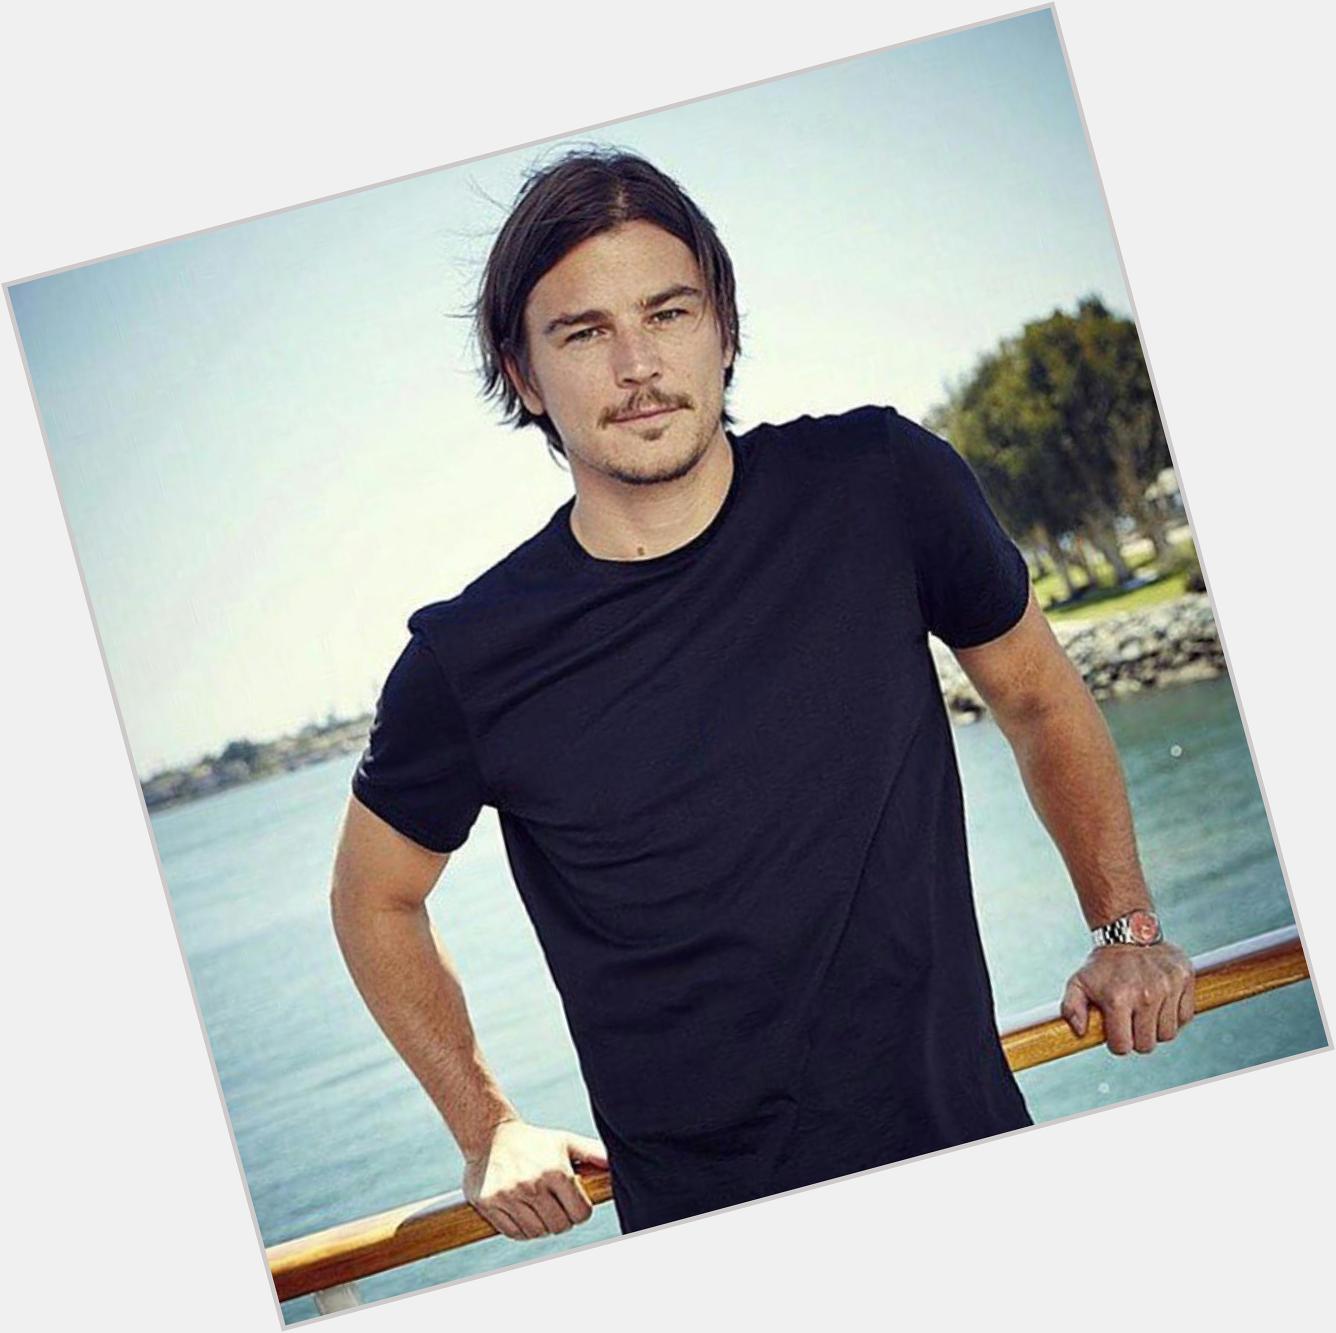 I discovered him in 1998 and I\m still fan. Now he\s 37 and he\s going to be a daddy ! Happy birthday Josh Hartnett 